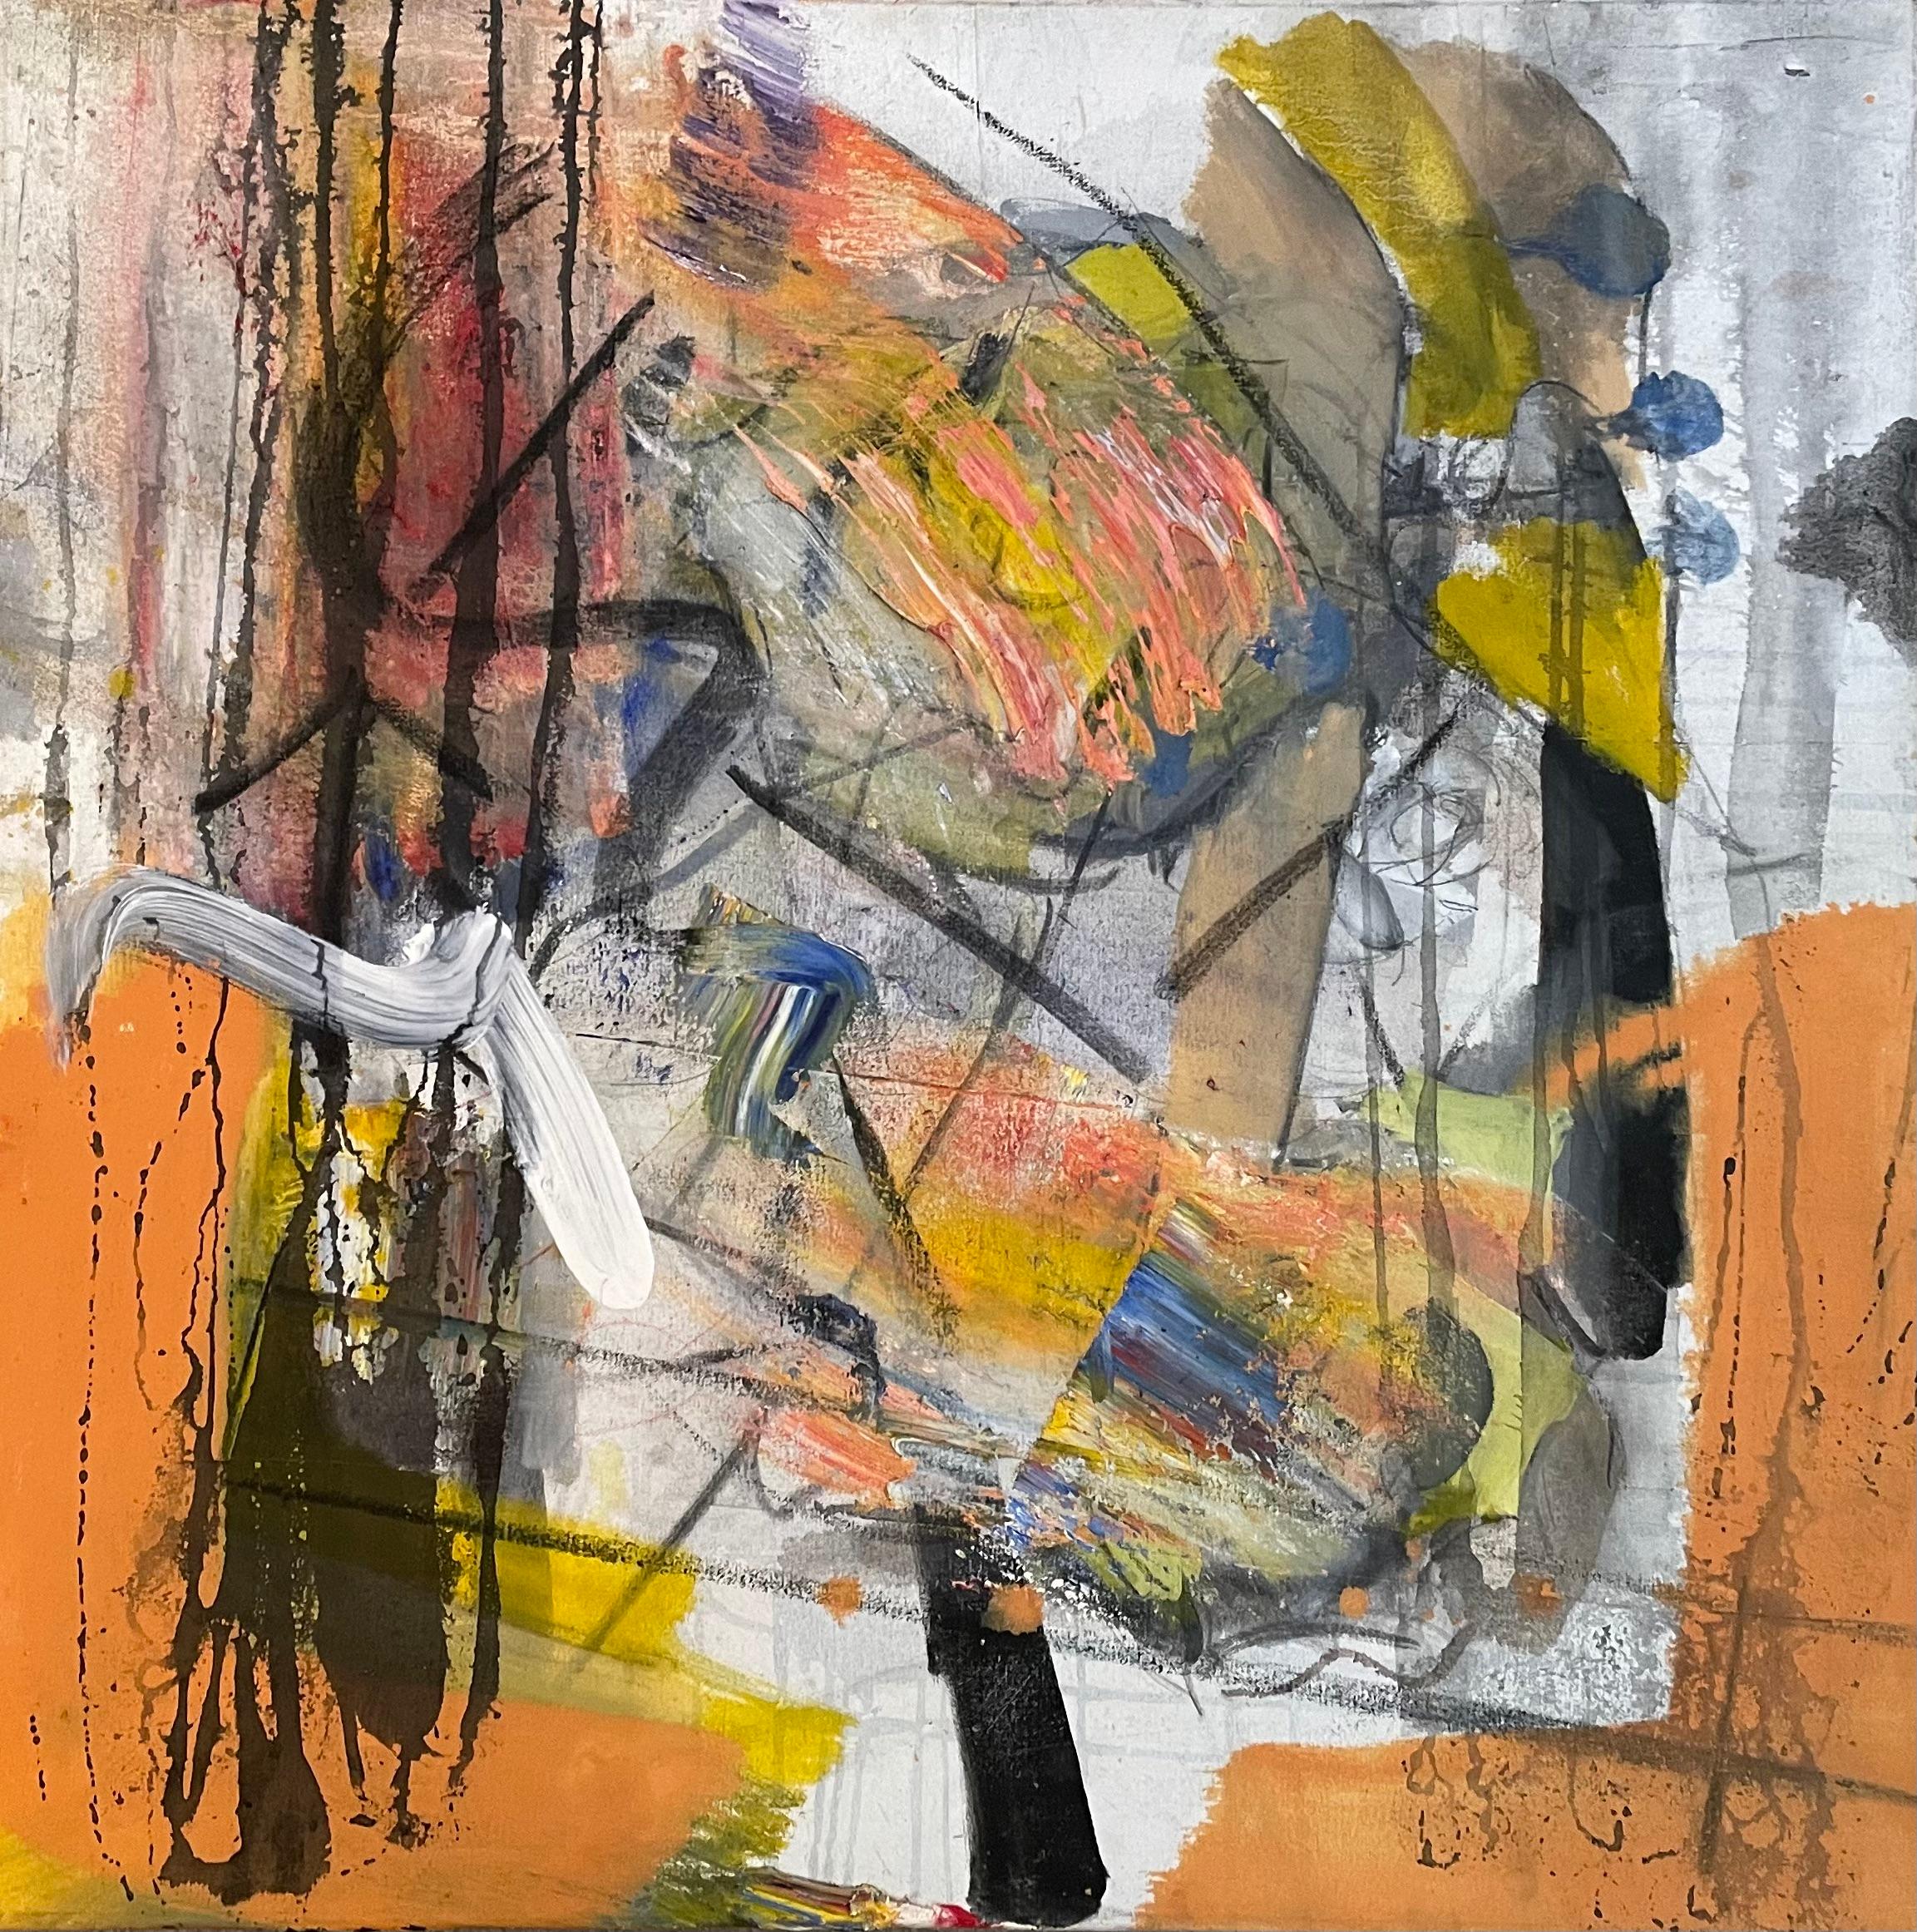 Steven H. Rehfeld Abstract Painting - "Exuberance" Orange Tones Contemporary Abstract Mixed Media by Steven Rehfeld